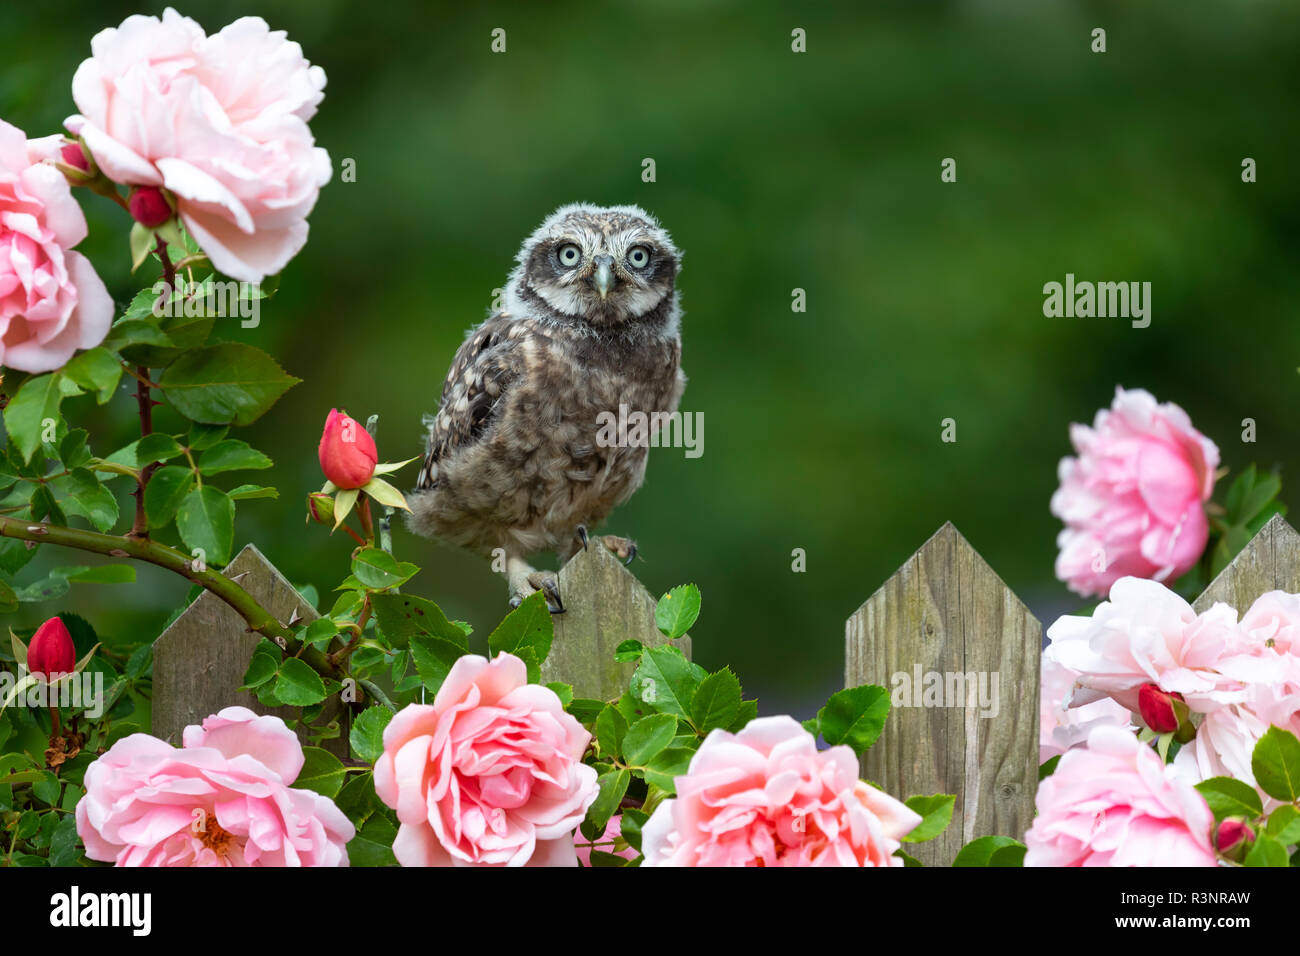 Young Little owl (Athene noctua) standing on a fence by a flowering Rose, England Stock Photo